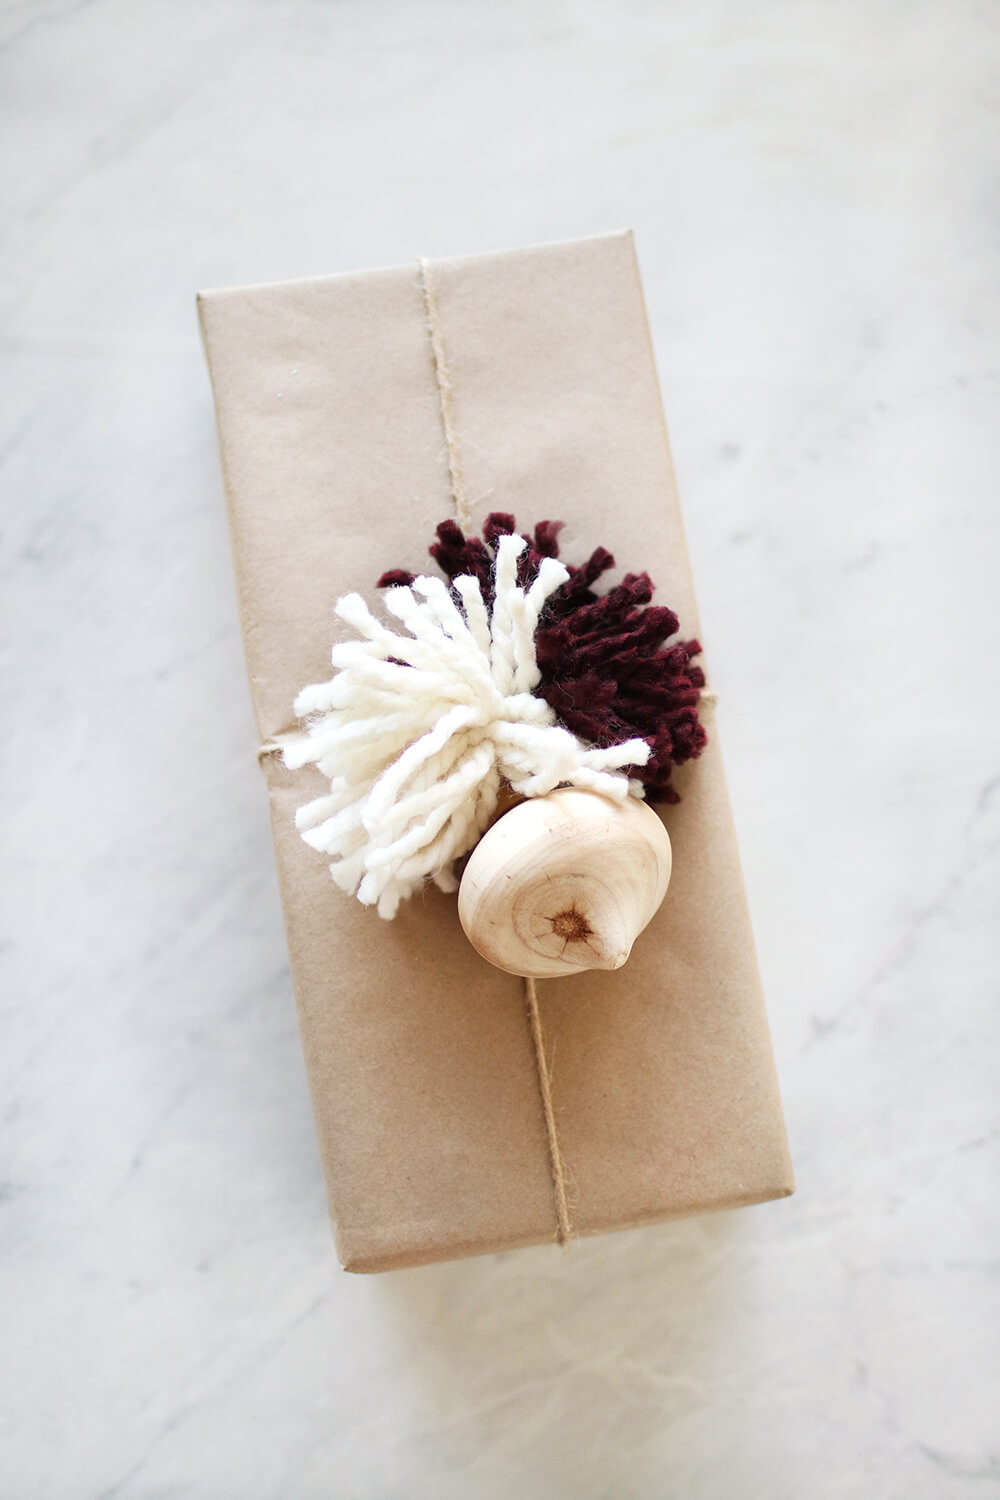 I am sharing how to DIY yarn pom poms to dress up your gift giving! I love the added texture and the layer it brings and they are super simple to create. Catch it over on KaraLayne.com!